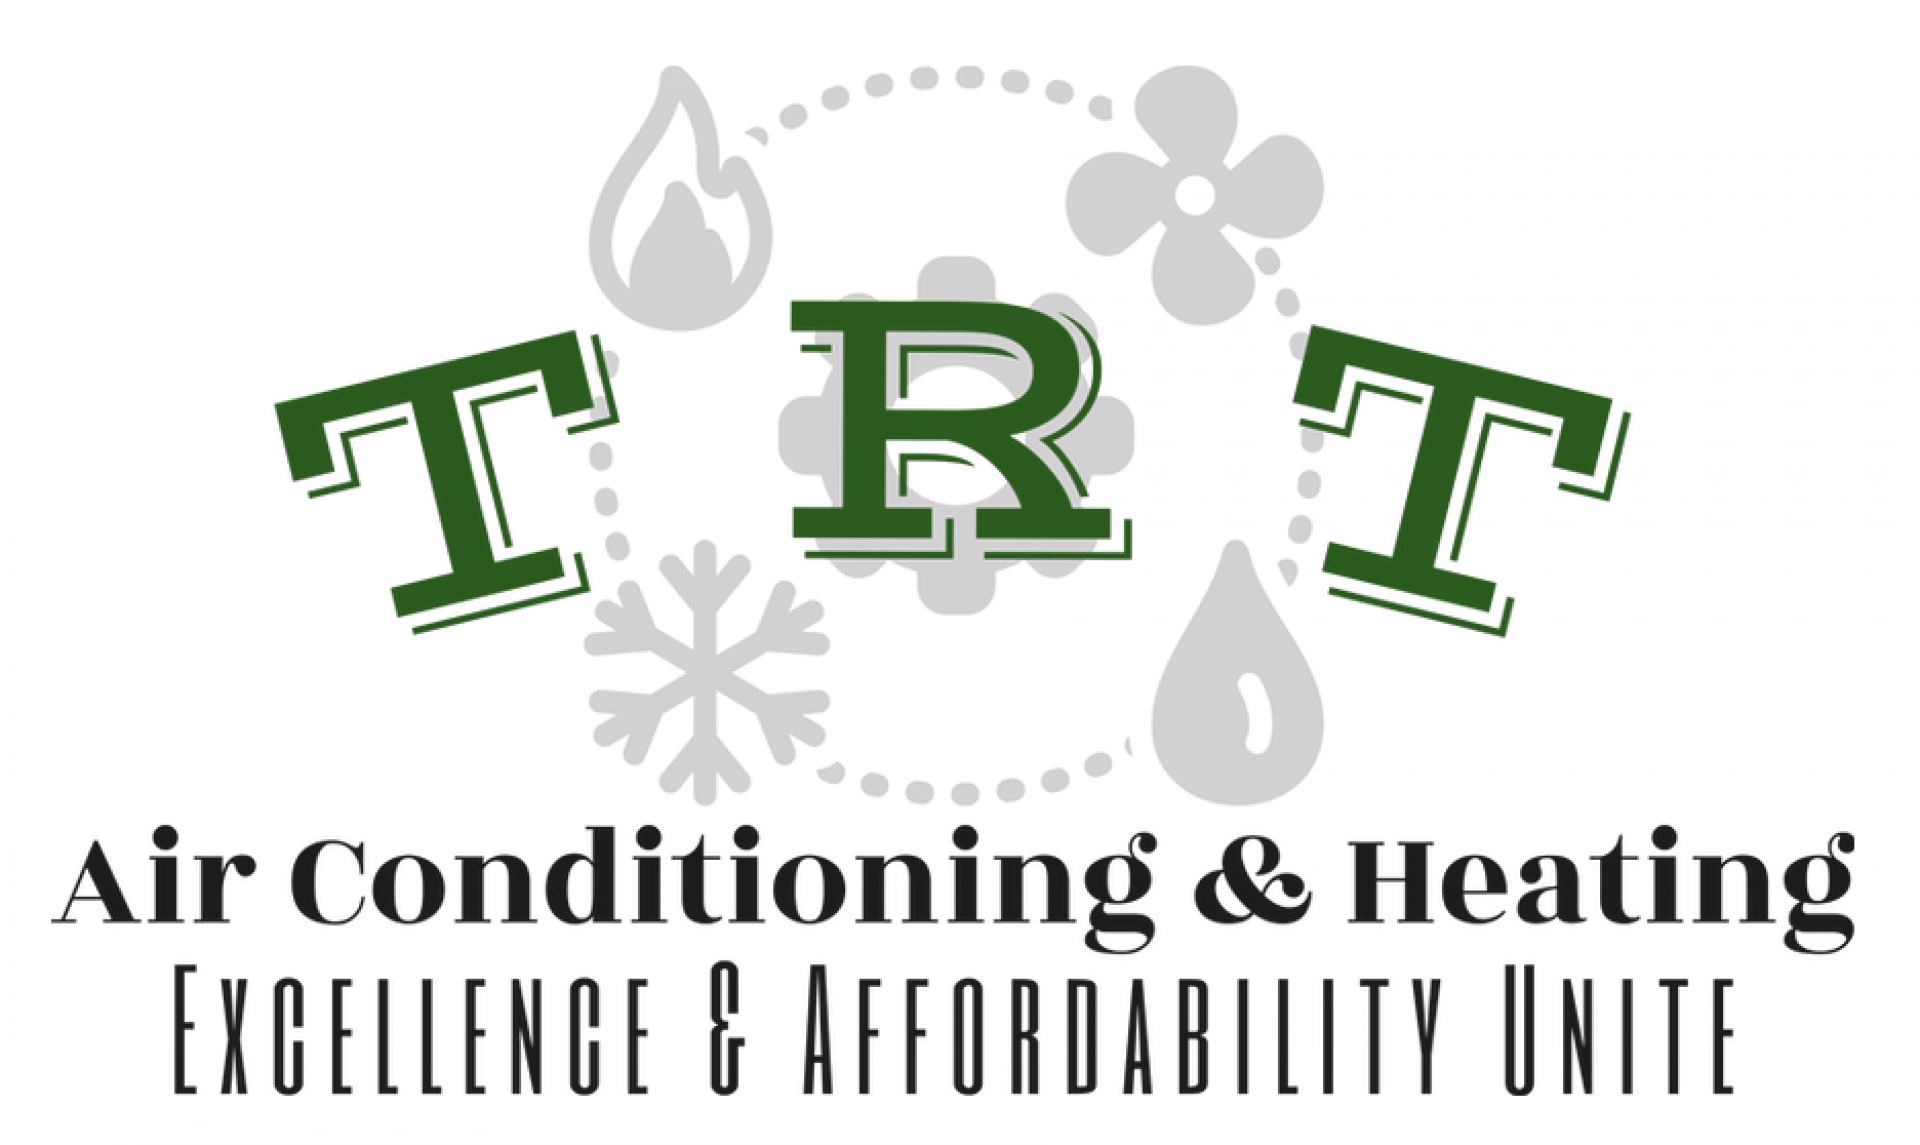 TRT Air Conditioning & Heating company logo